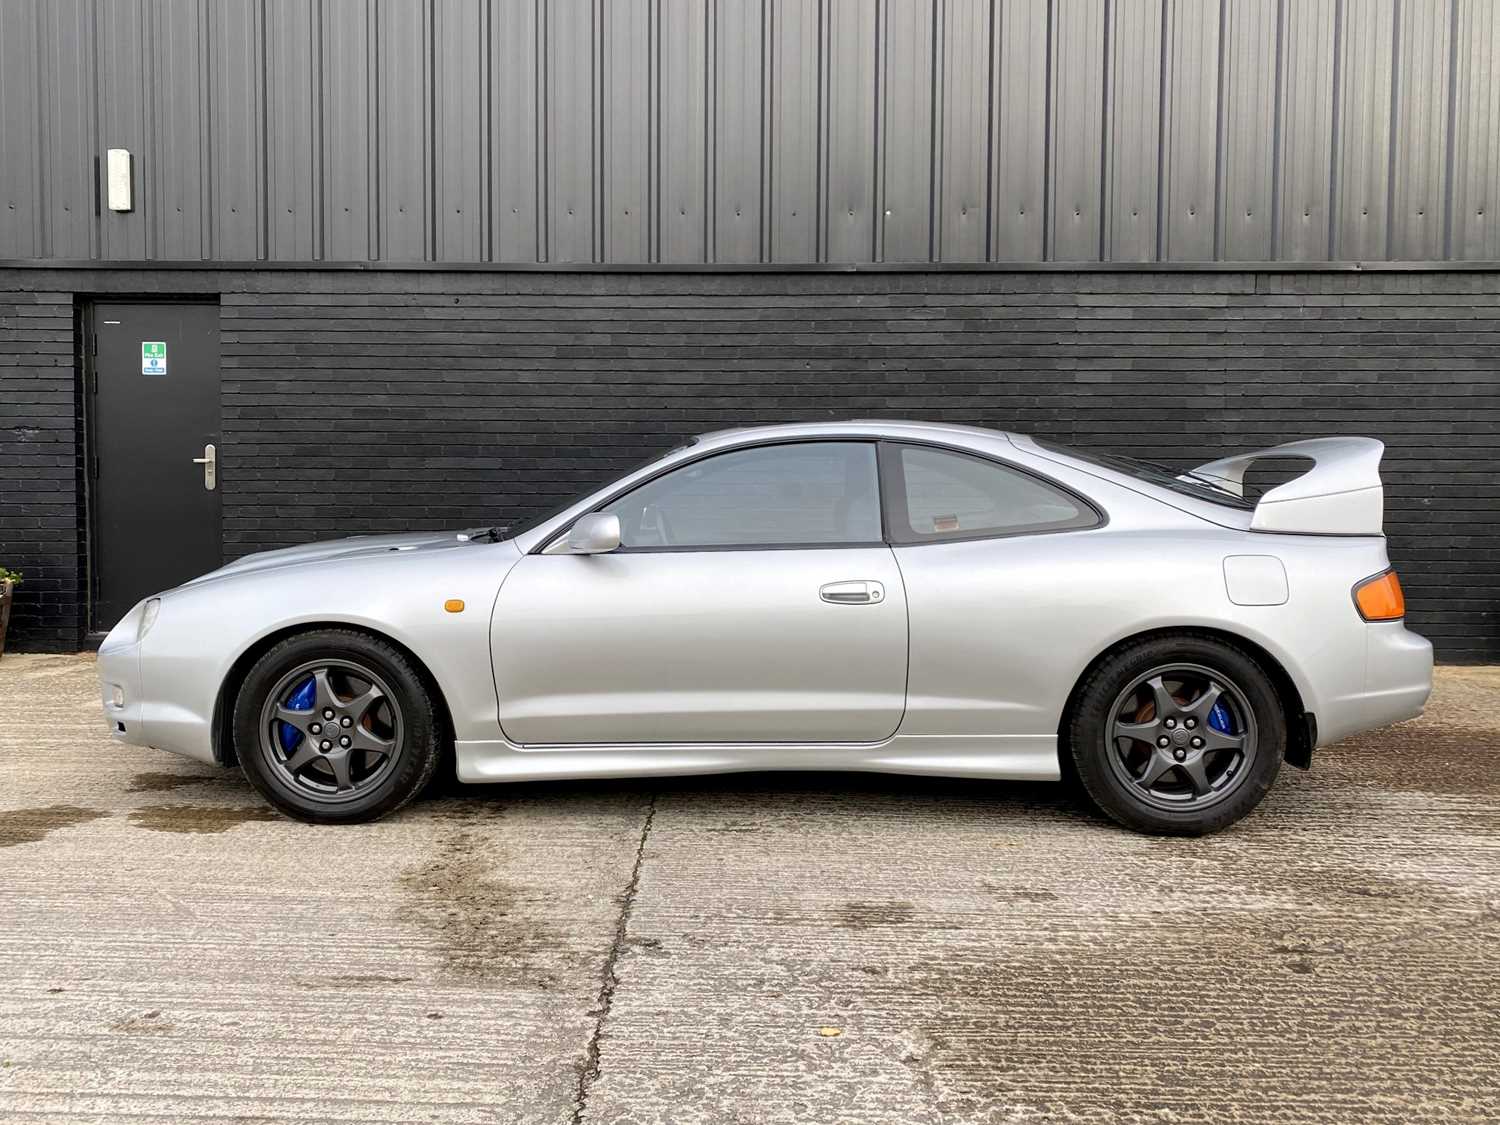 1996 Toyota Celica GT4 ST205 - Image 8 of 65